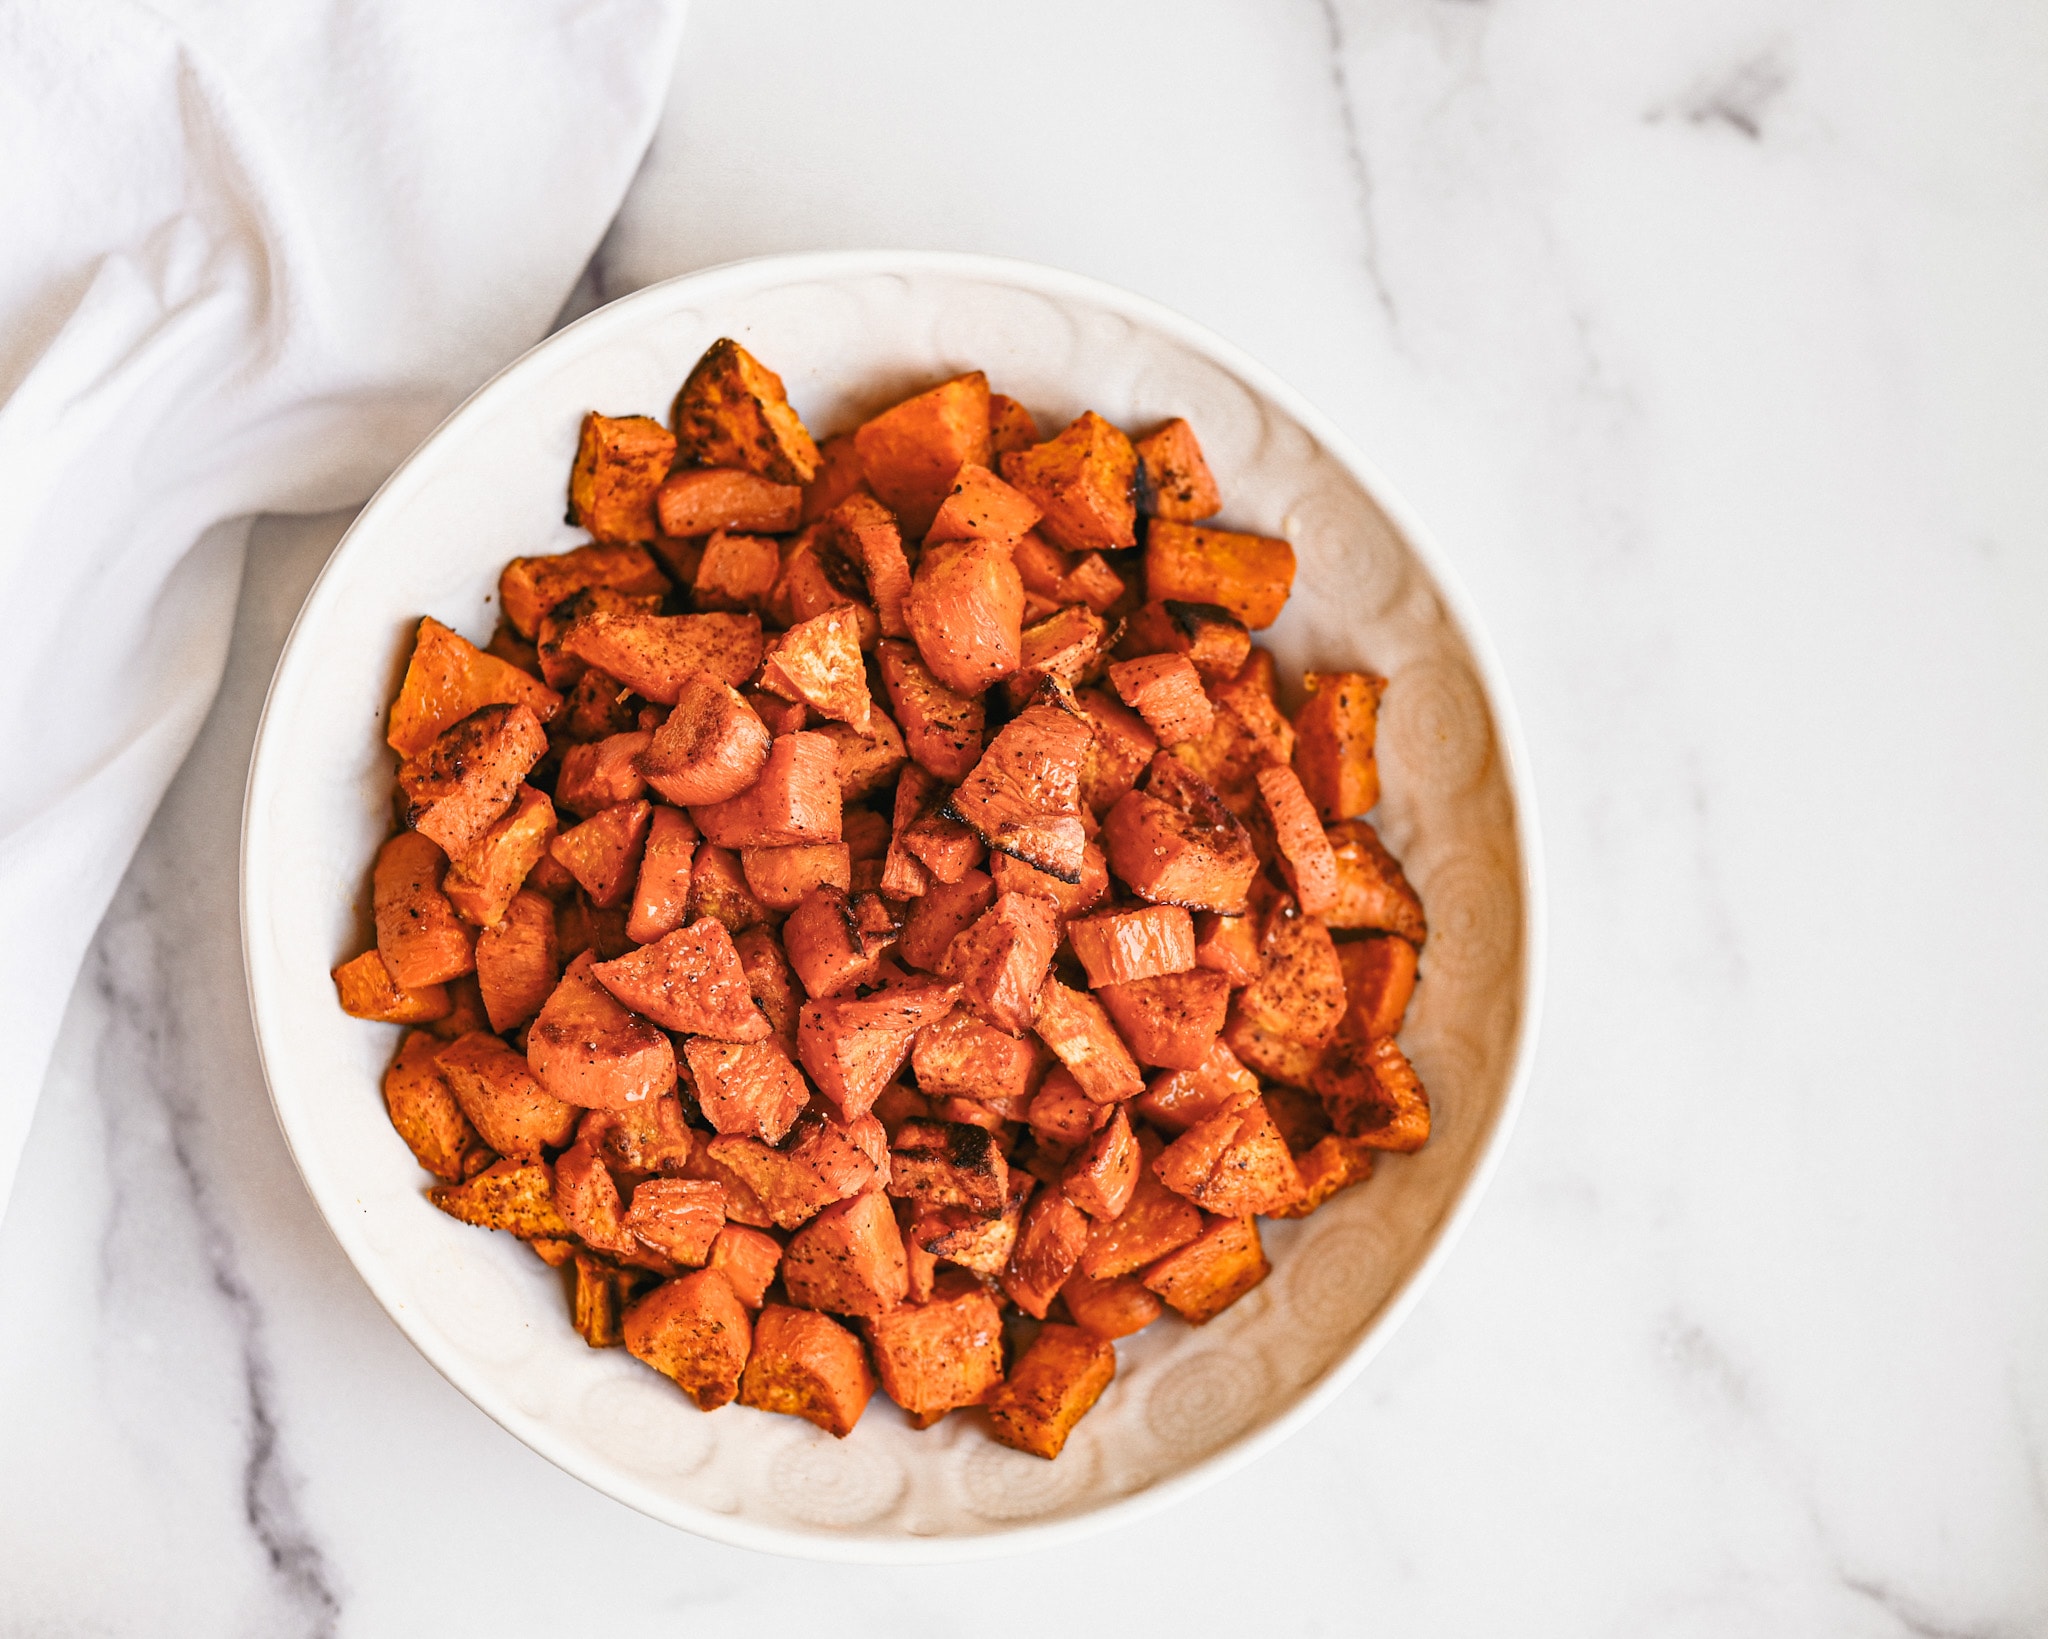 A zoomed out look at roasted sweet potatoes in white bowl on granite top